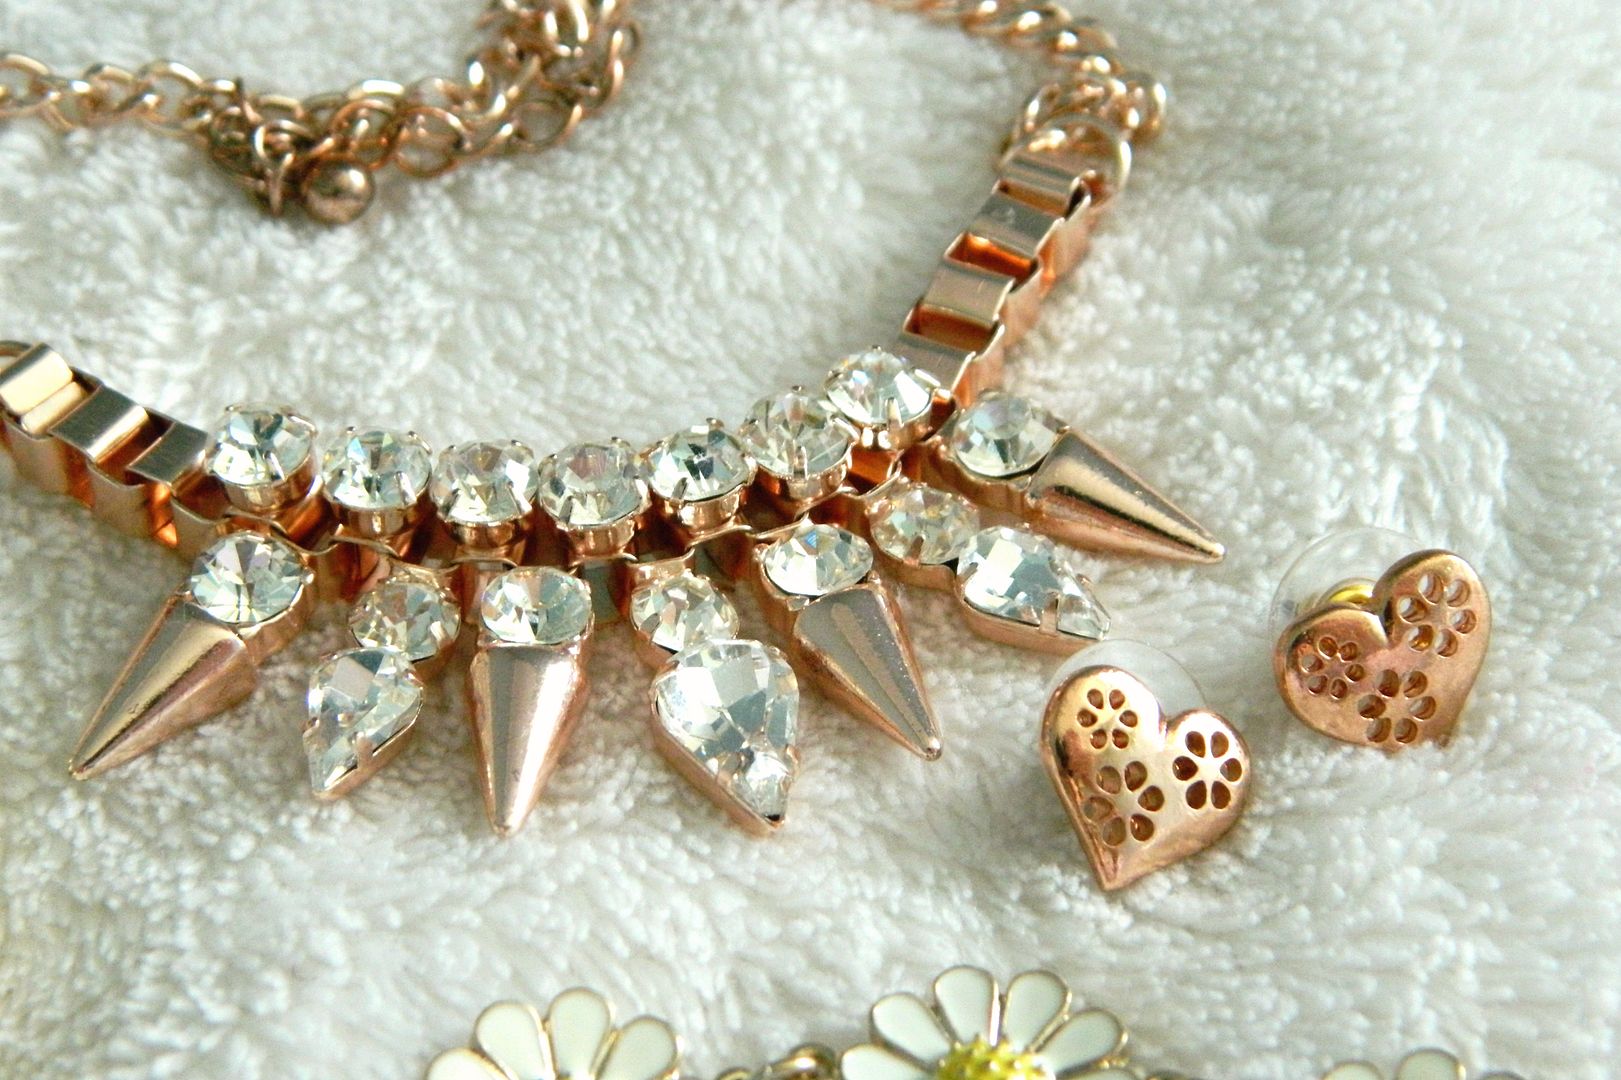 Spring And Summer 2014 Fashion Accessories Jewellery Haul Rose Gold H M Spike Statement Necklace Oasis Heart Cut Out Earrings Belle-amie UK Beauty Fashion Lifestyle Blog